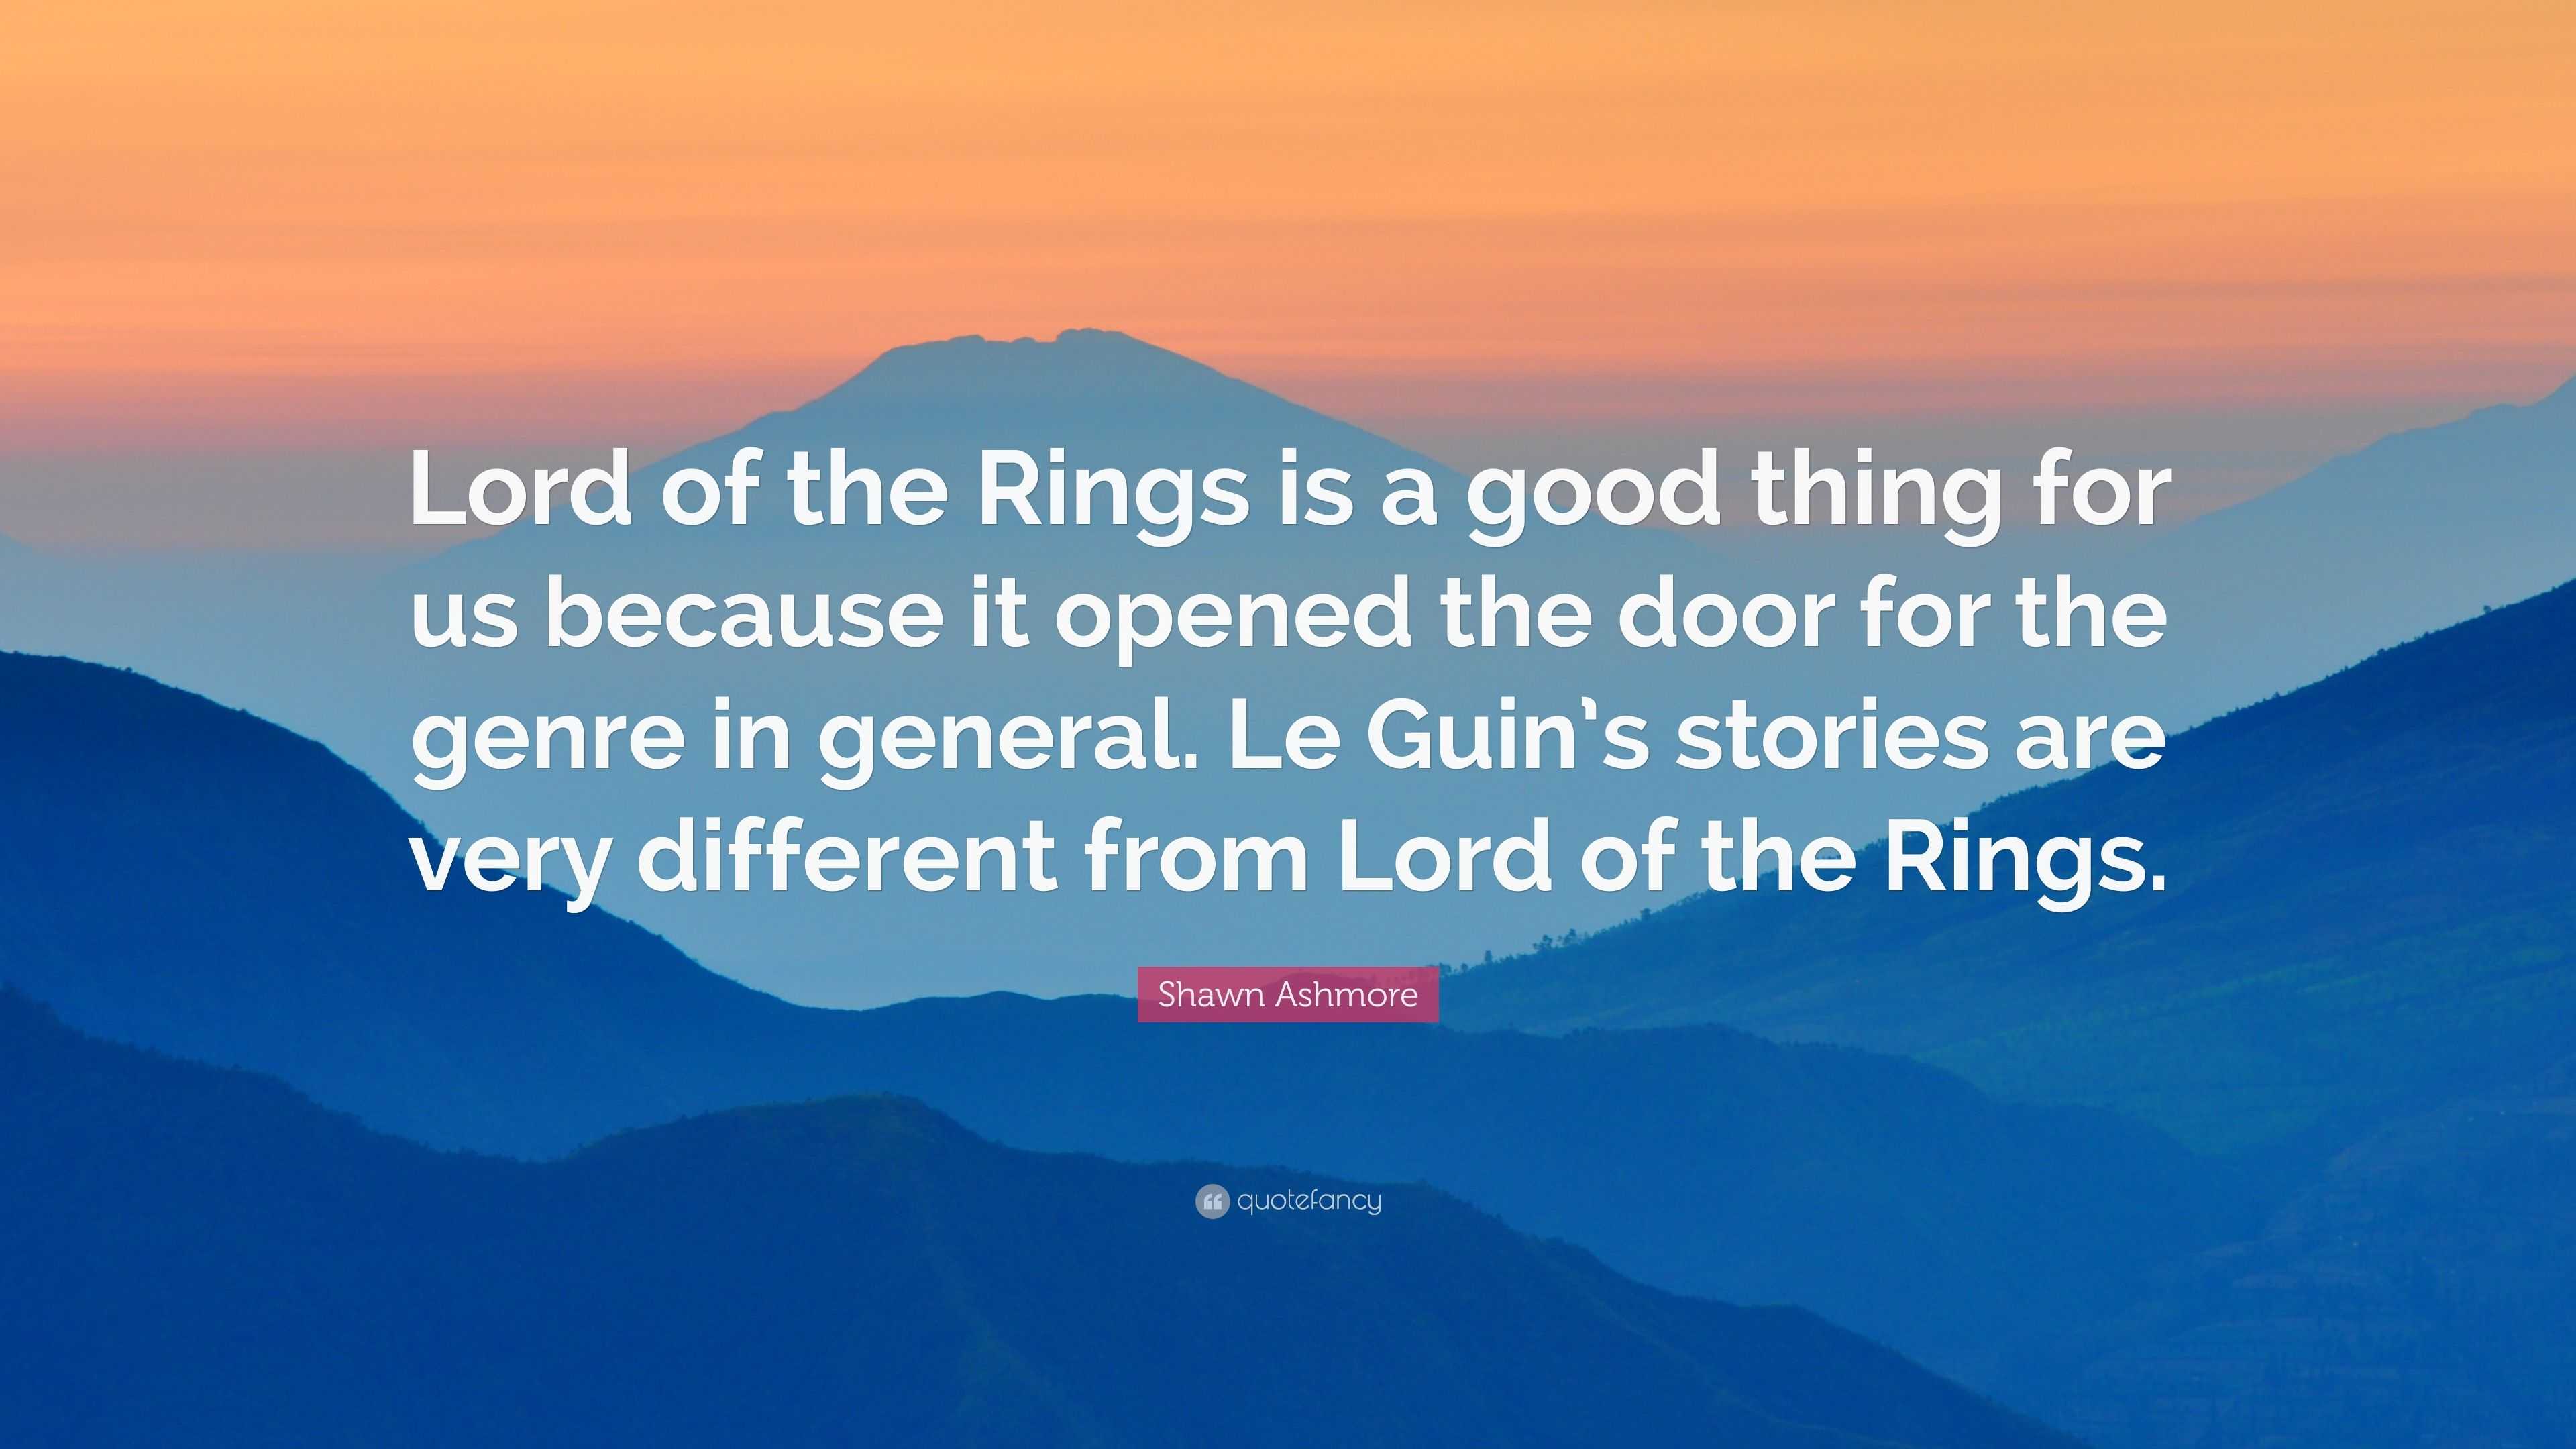 The Lord of the Rings: The Rings of Power Cast & Character Guide: Who's Who